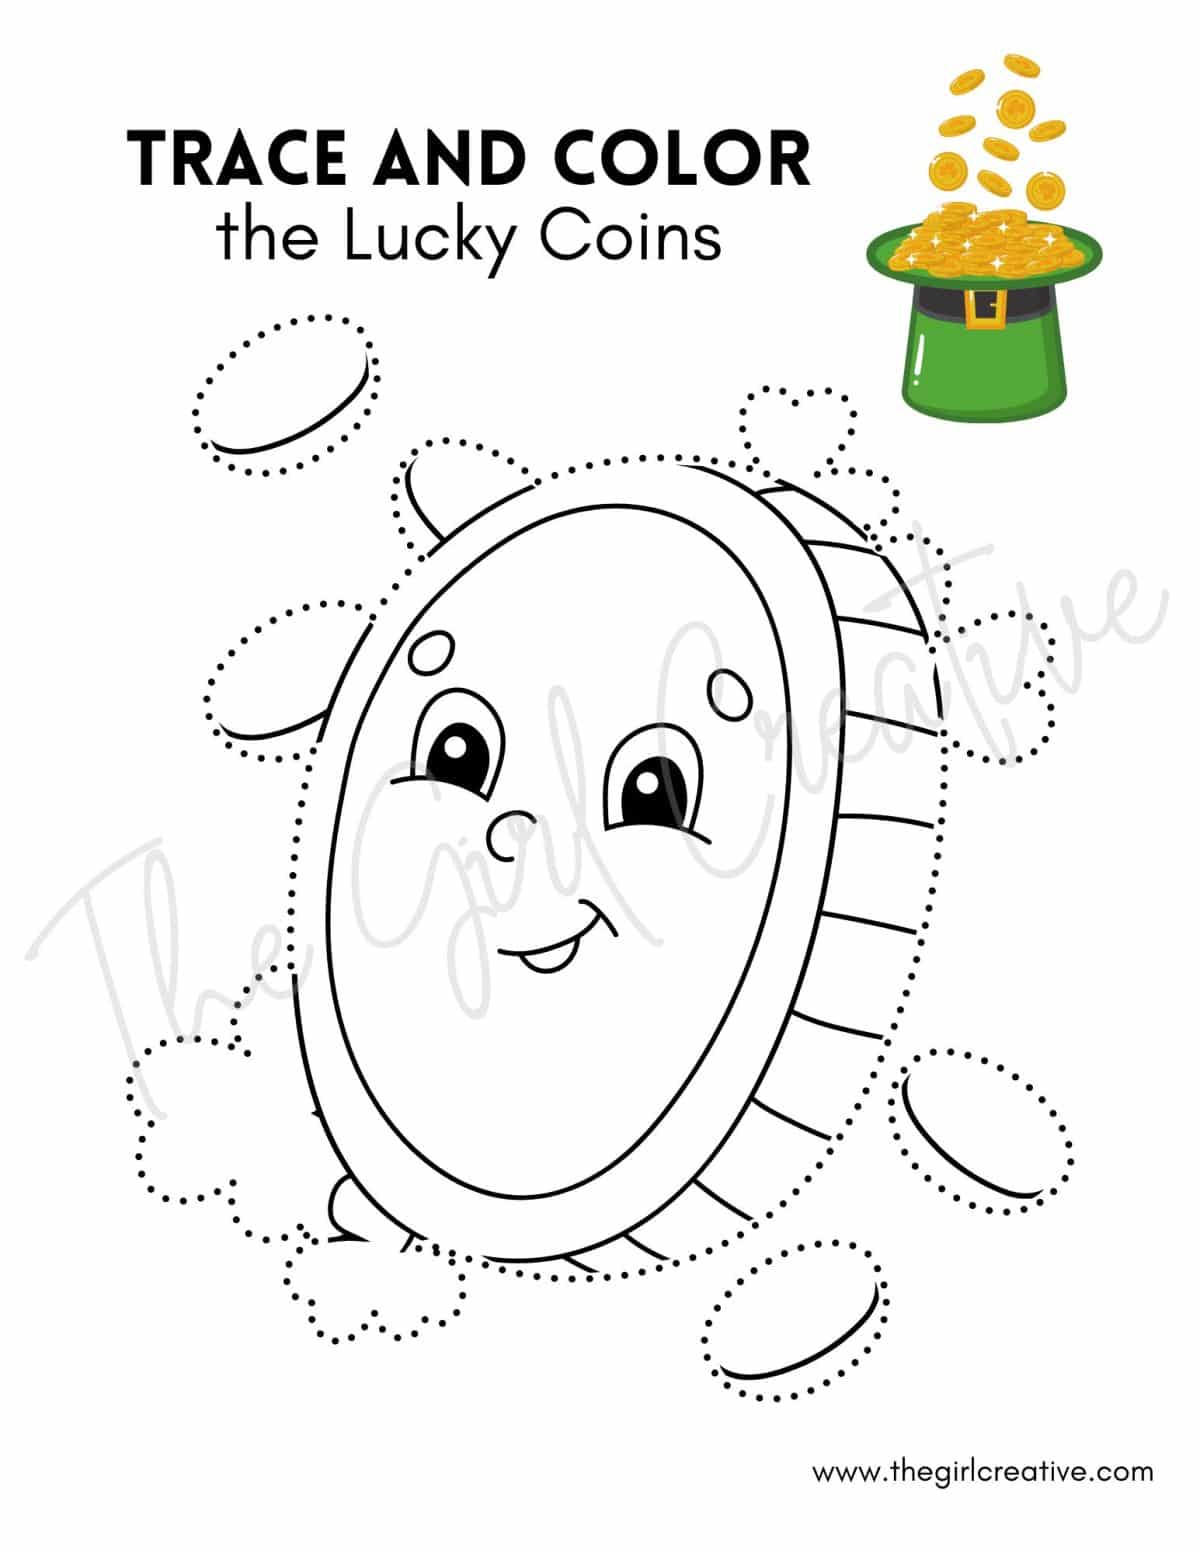 Gold Coin coloring page for St. Patrick's Day